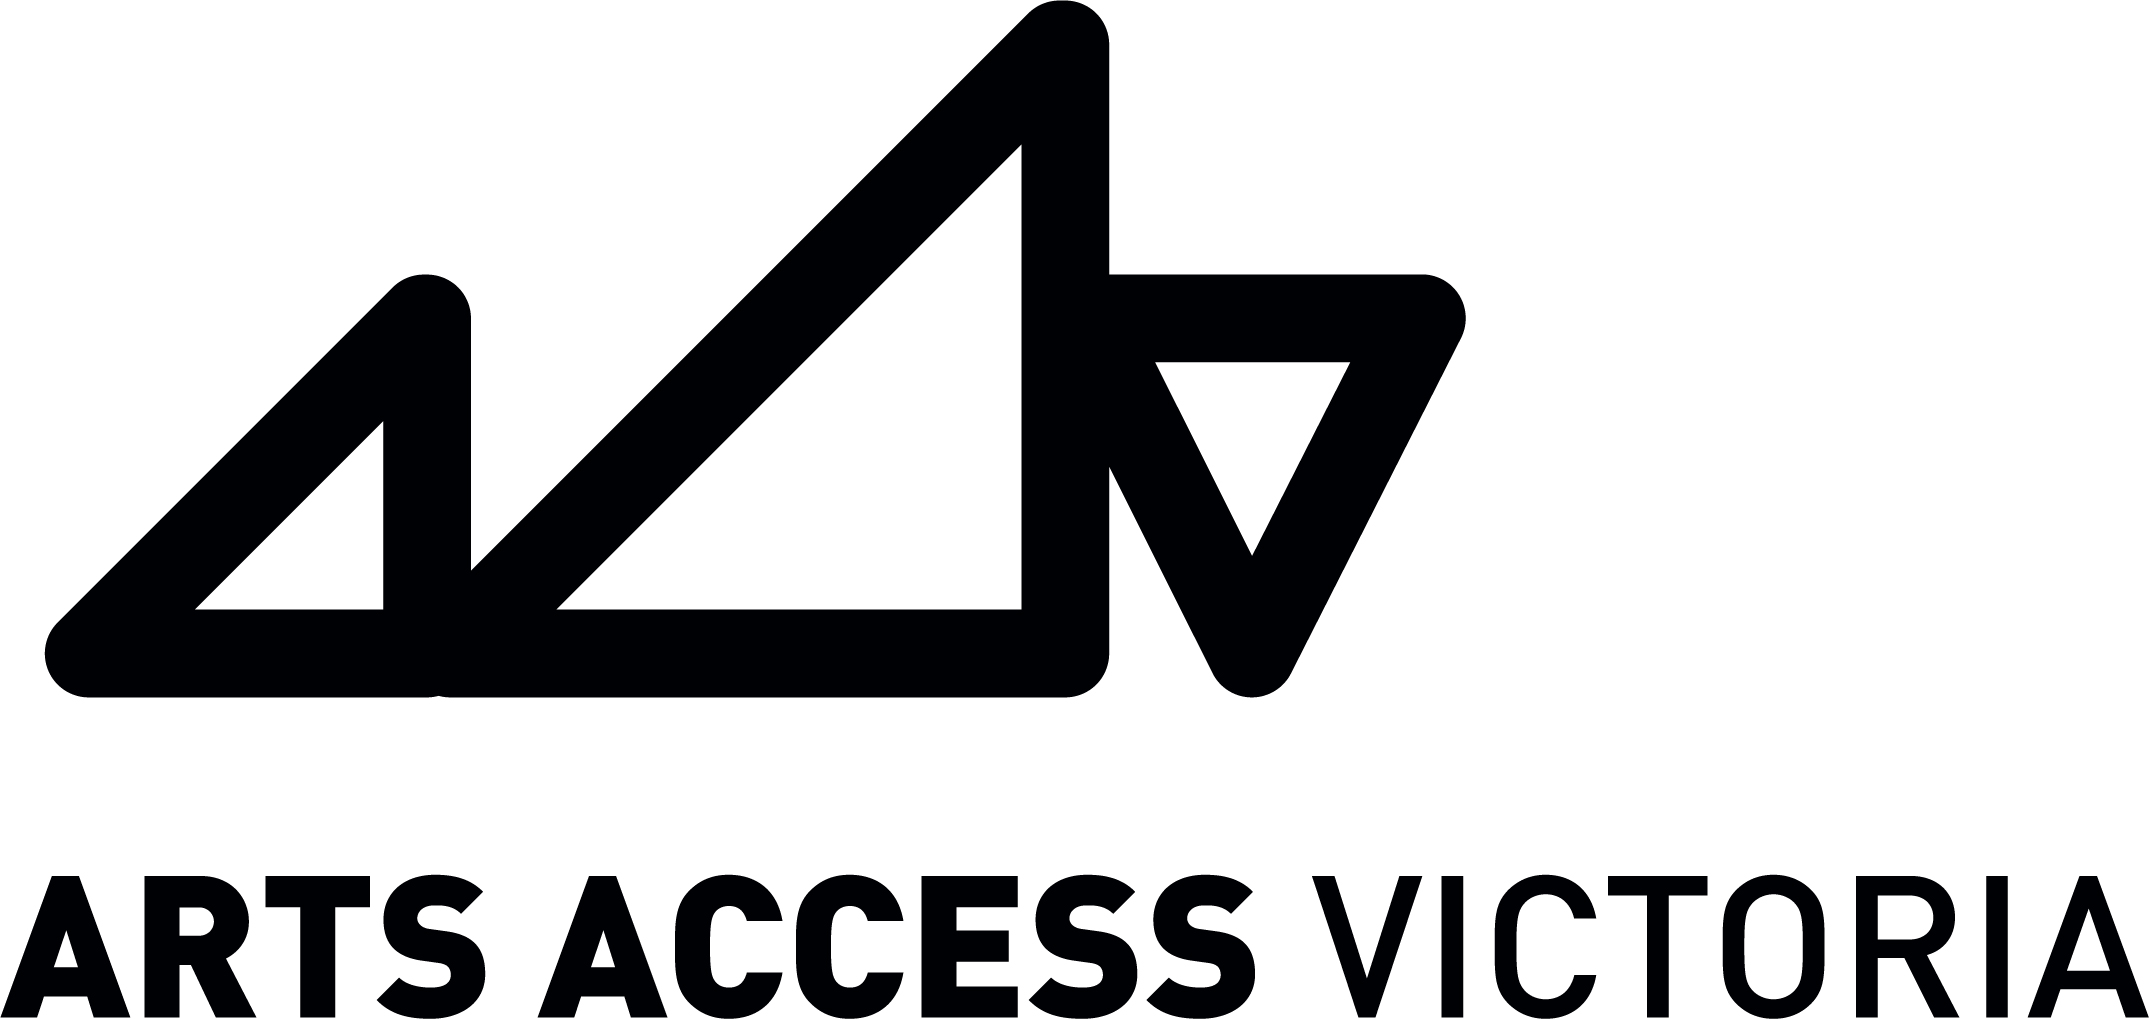 Arts Access Victoria logo, black lettering on white background